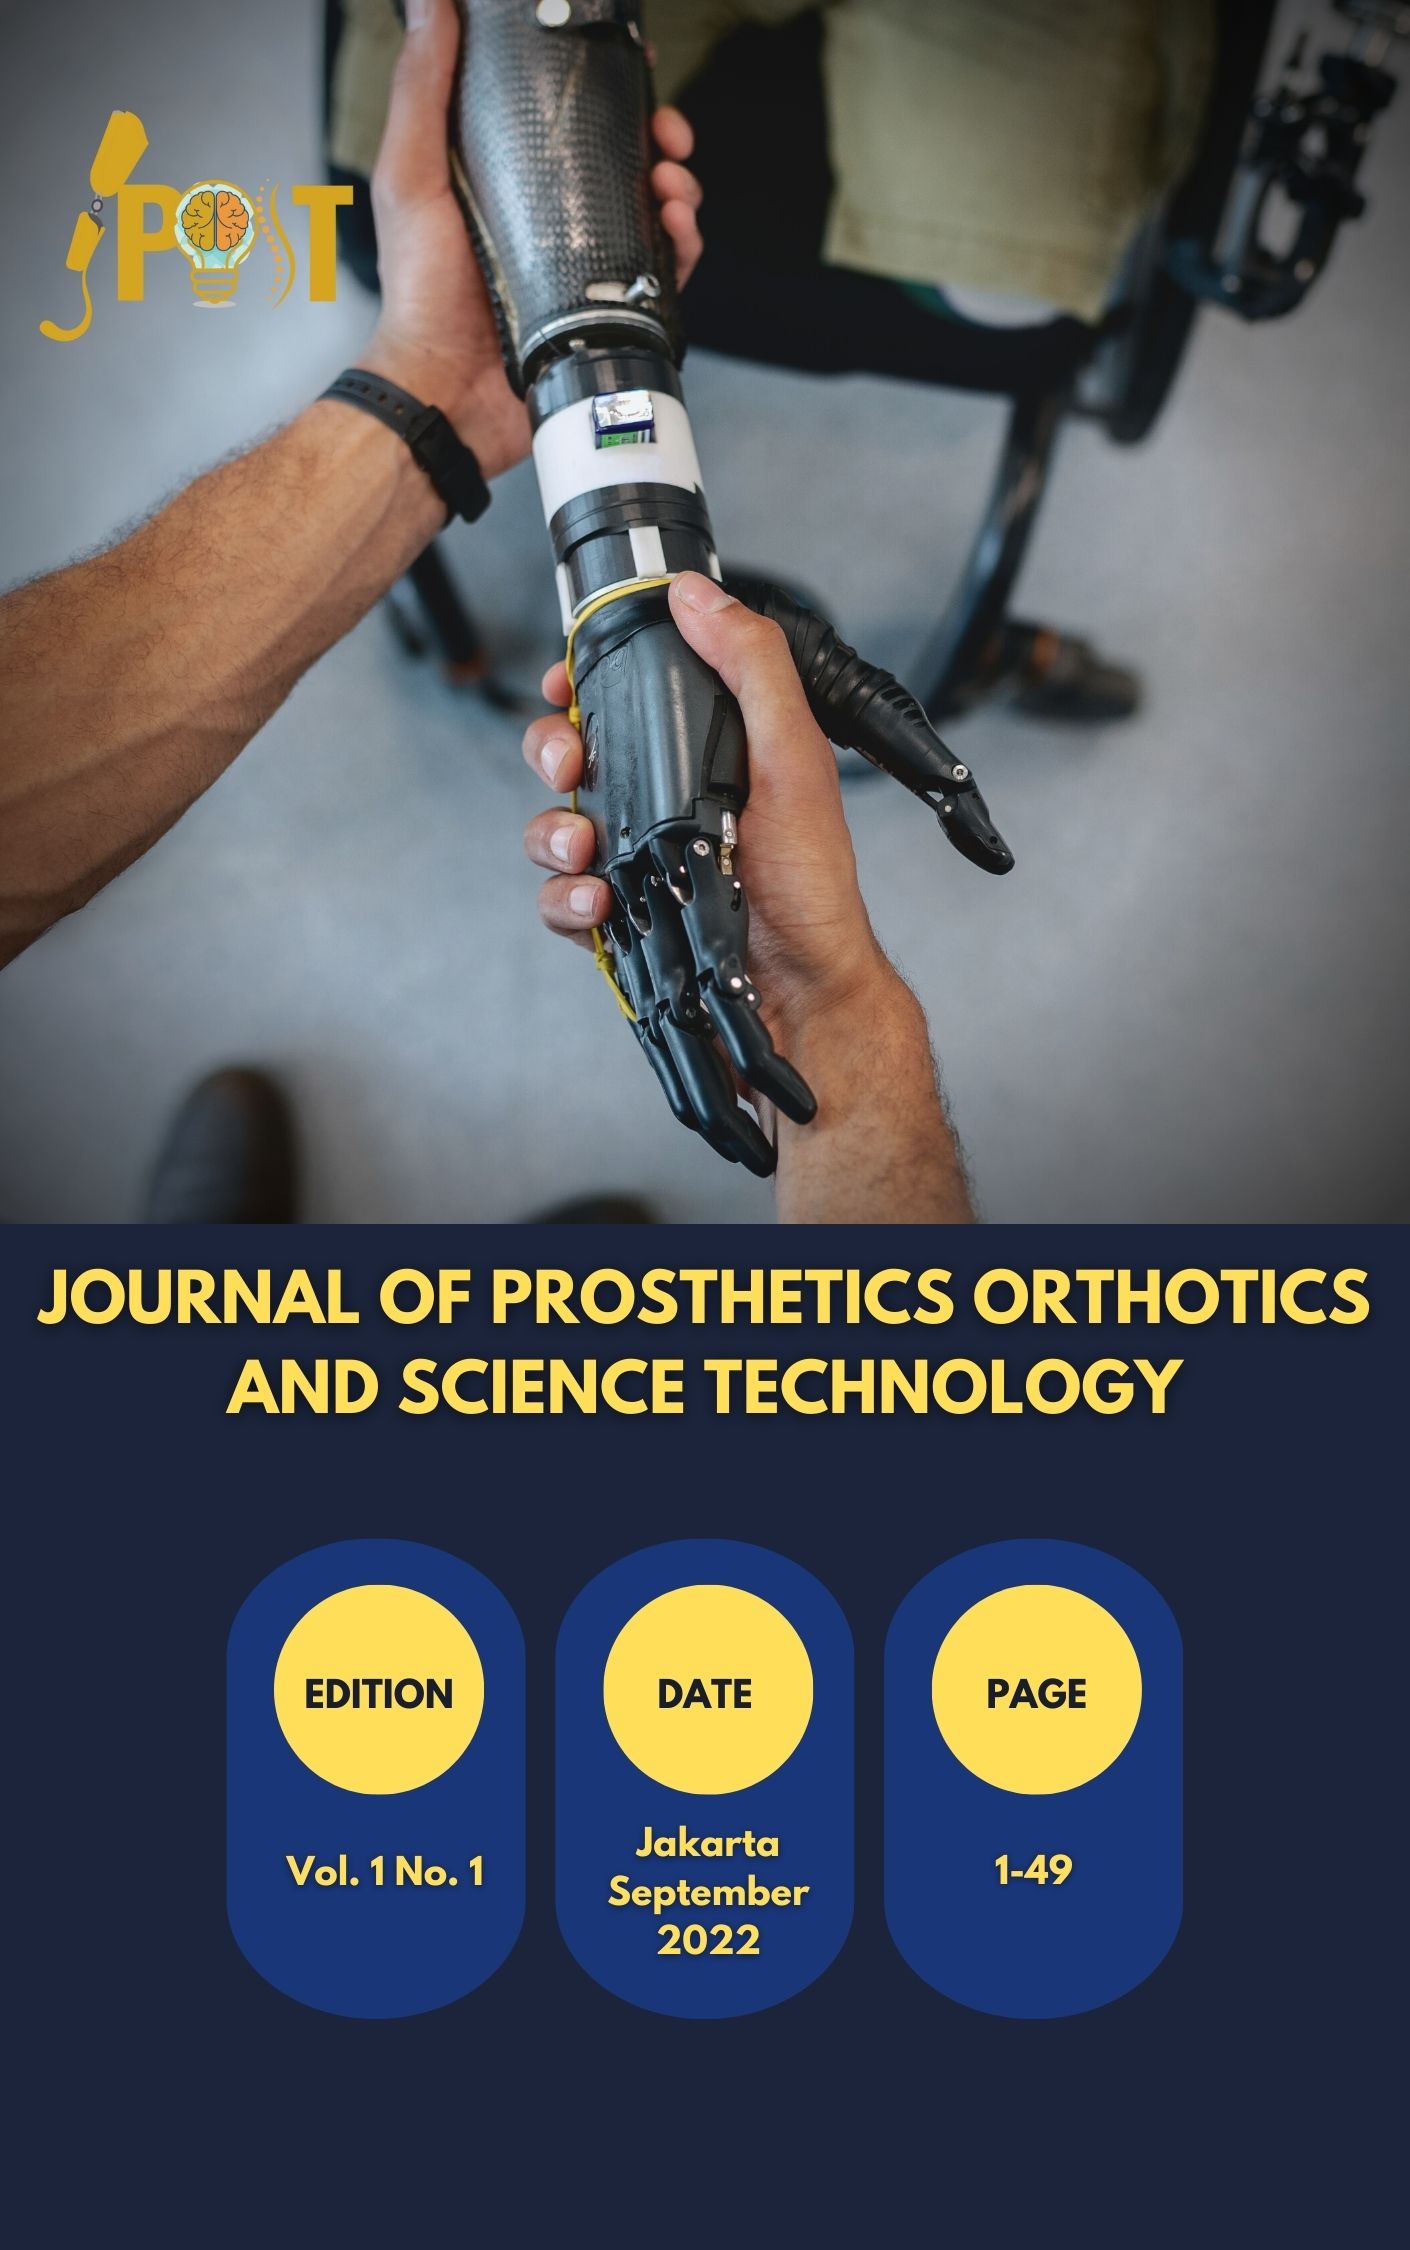 					View Vol. 1 No. 1 (2022): JPOST: JOURNAL OF PROSTHETICS AND ORTHOTICS AND SCIENCE TECHNOLOGY
				